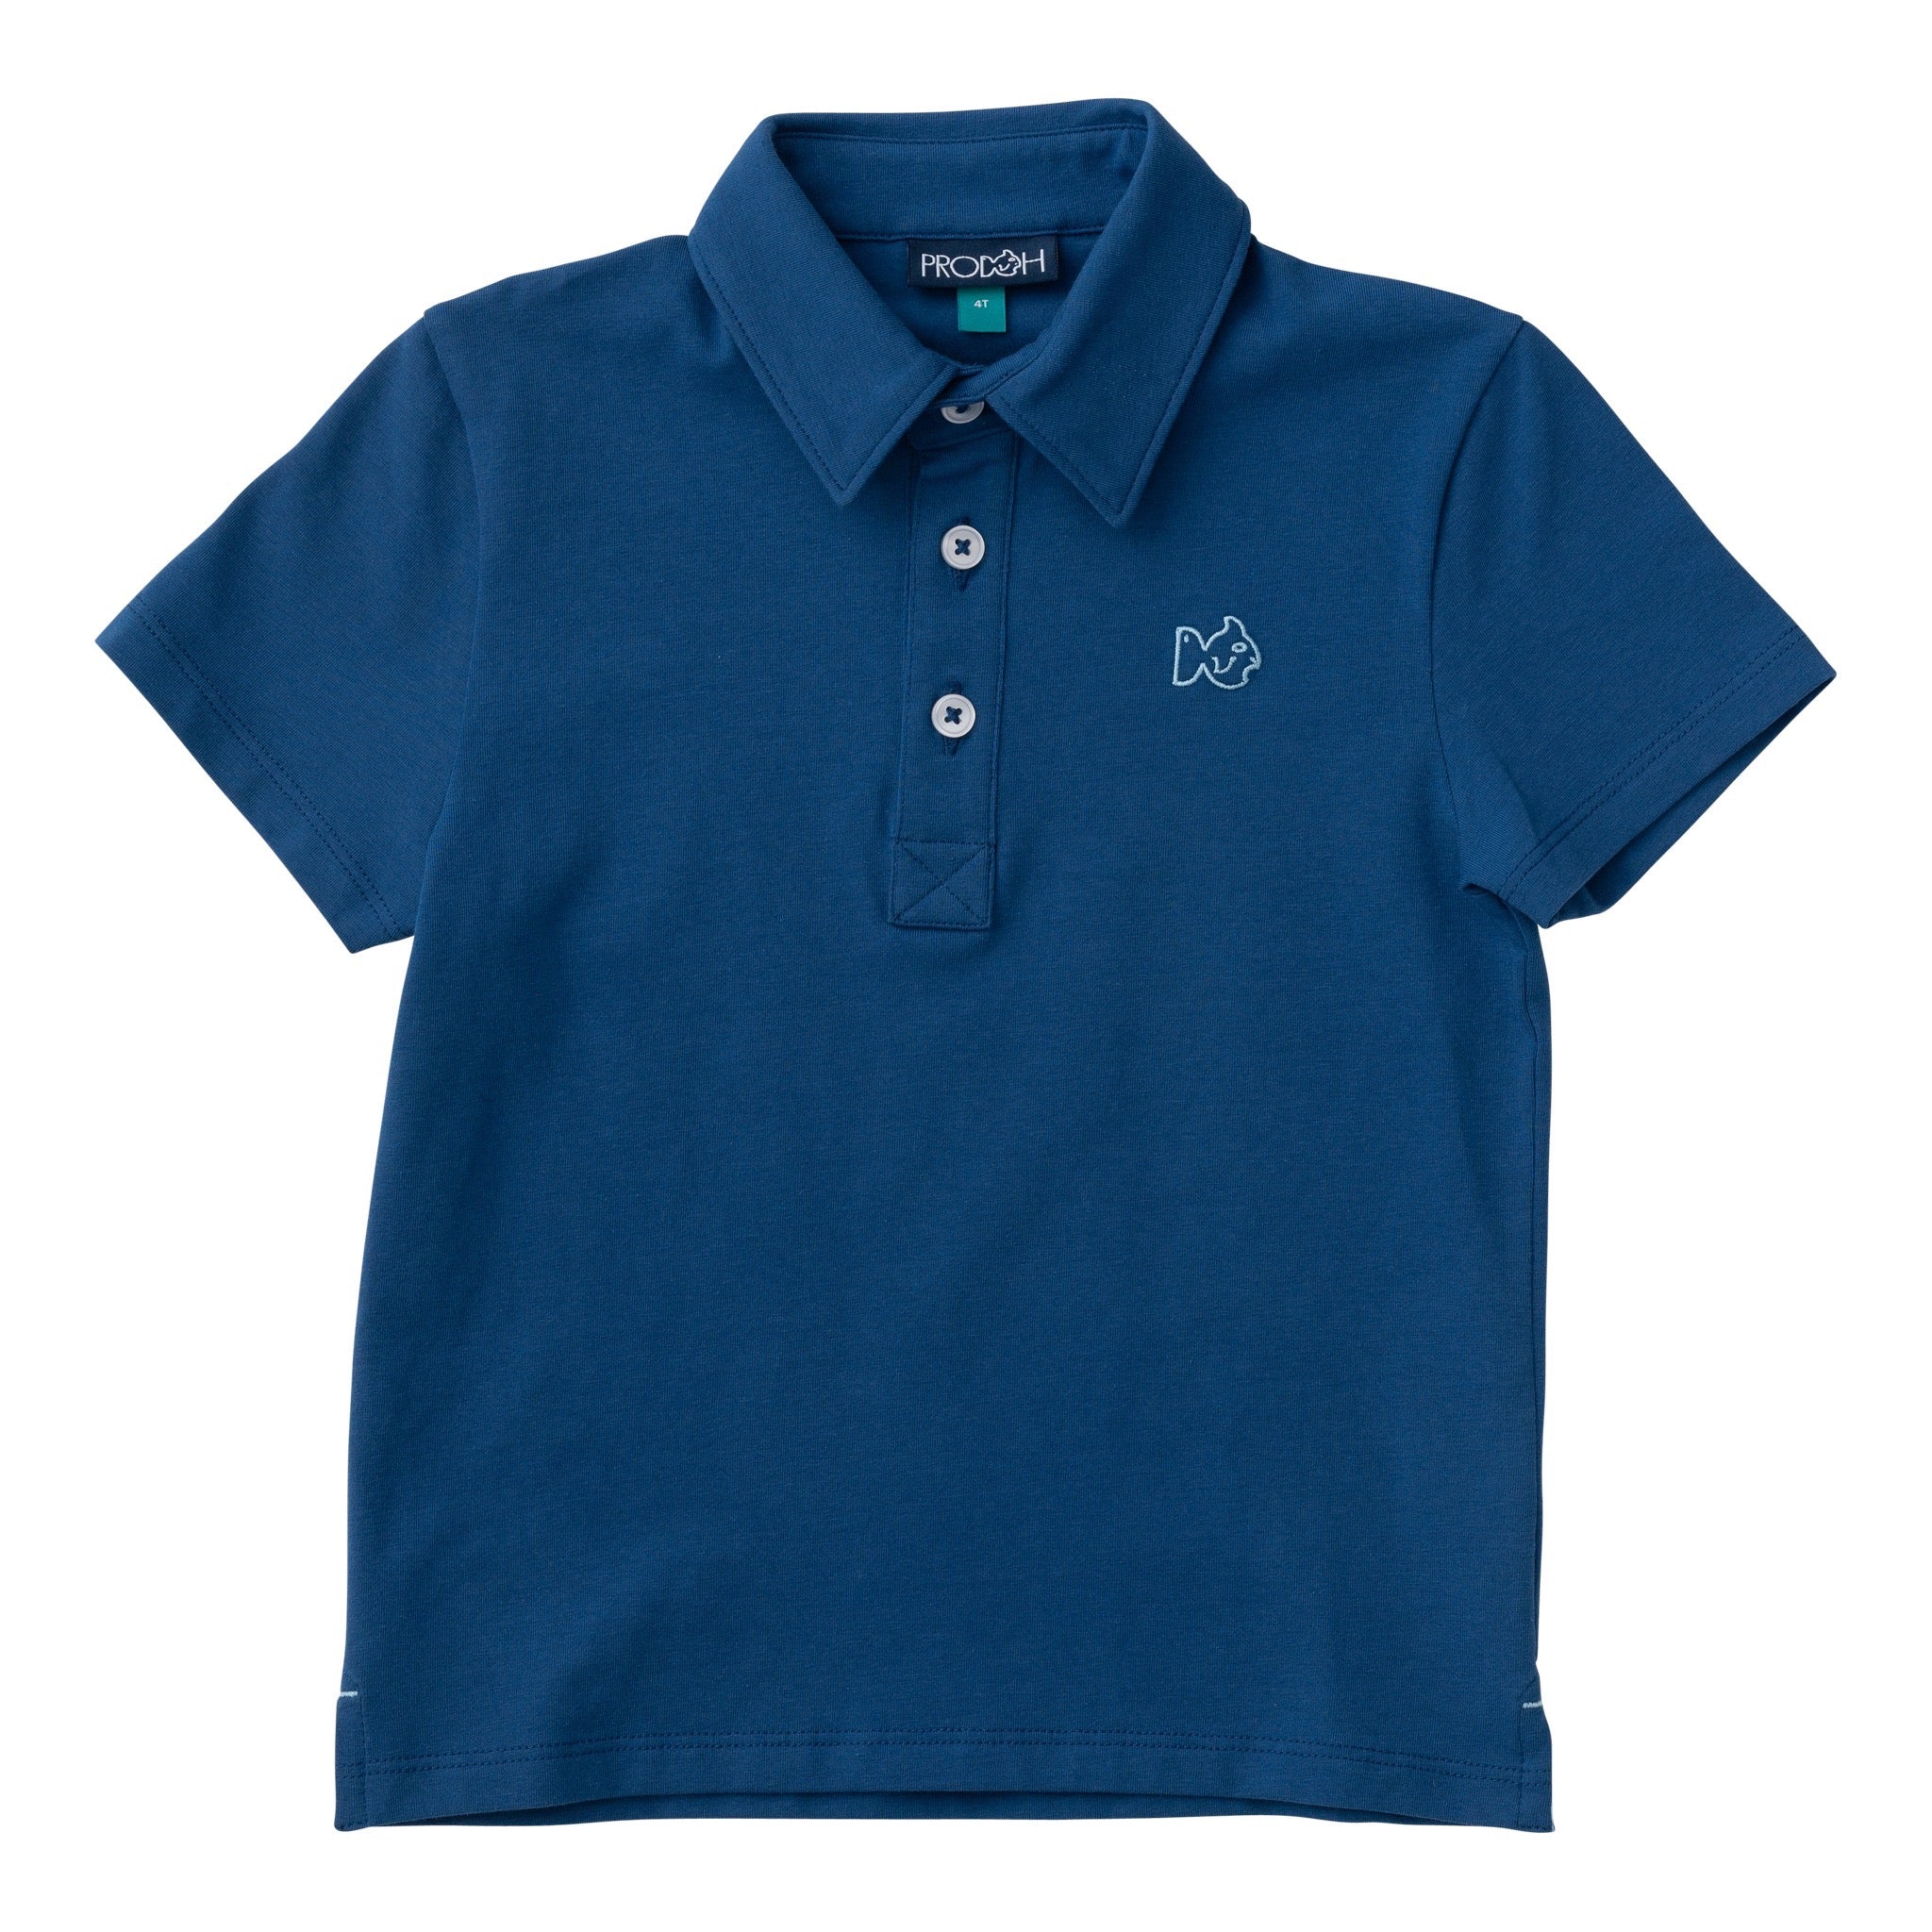 Too Cool for School- Navy Polo